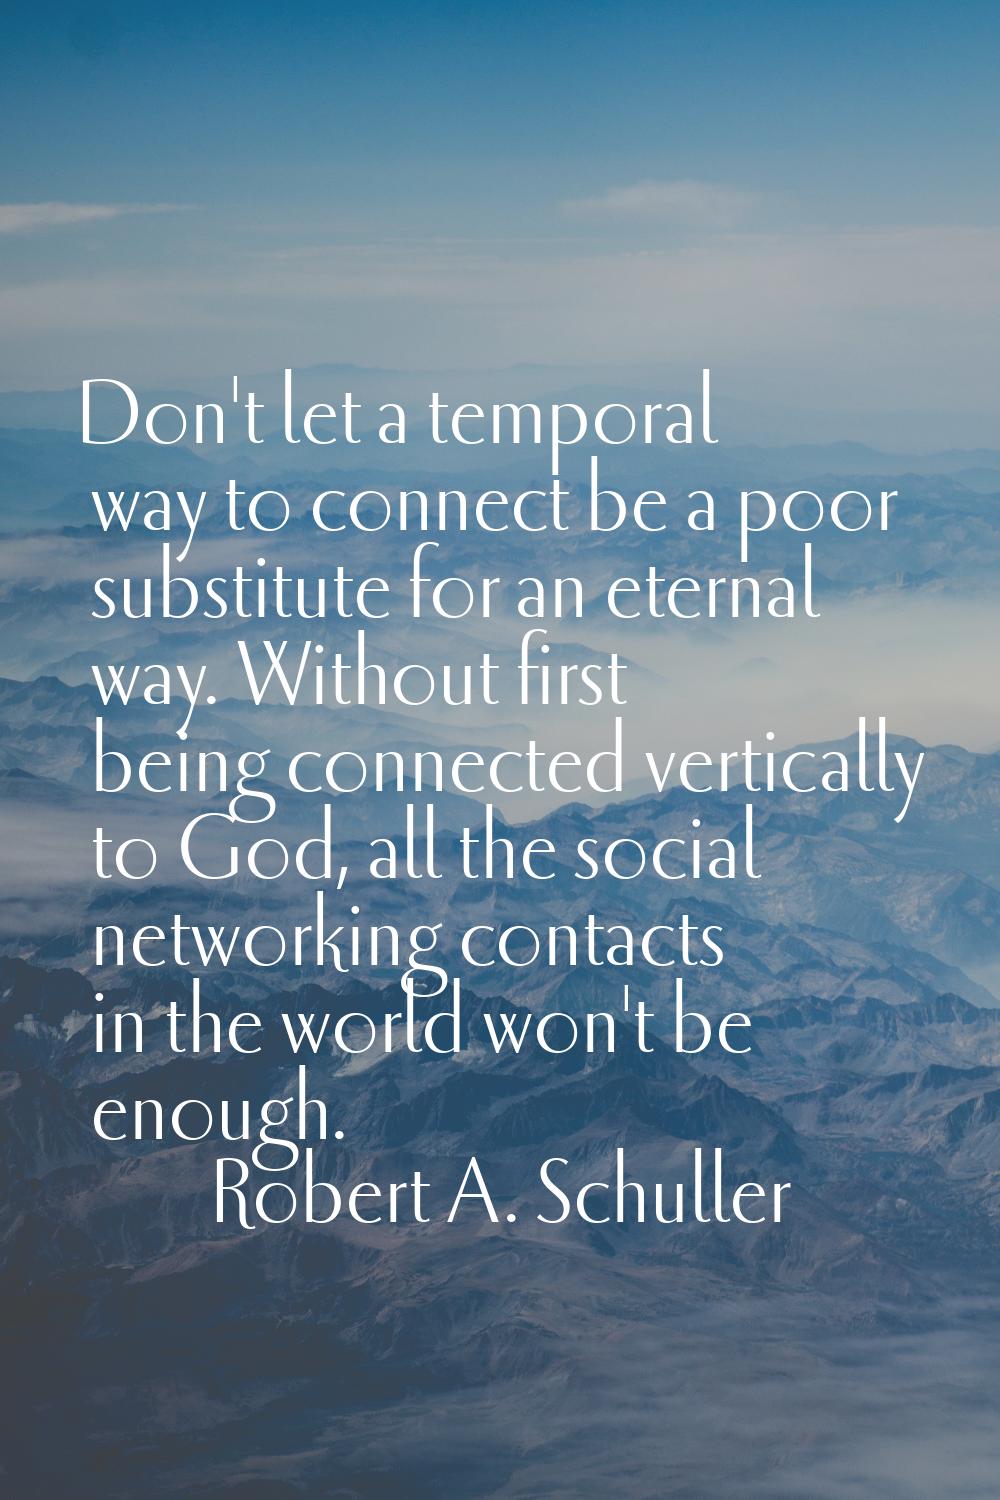 Don't let a temporal way to connect be a poor substitute for an eternal way. Without first being co